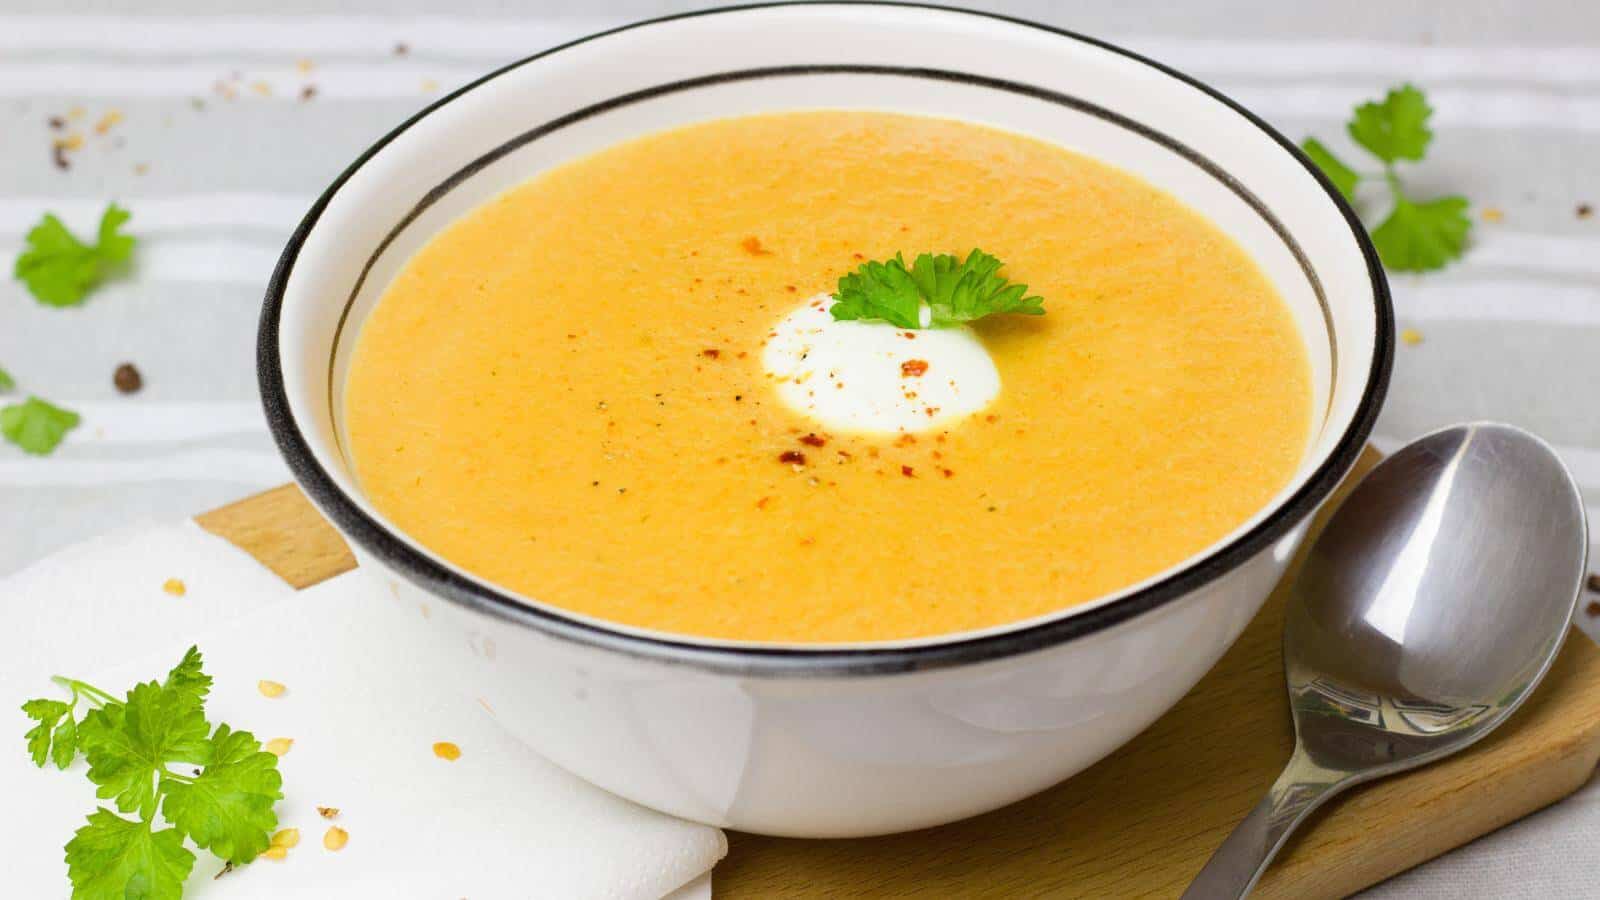 A bowl full of creamy yellow soup.